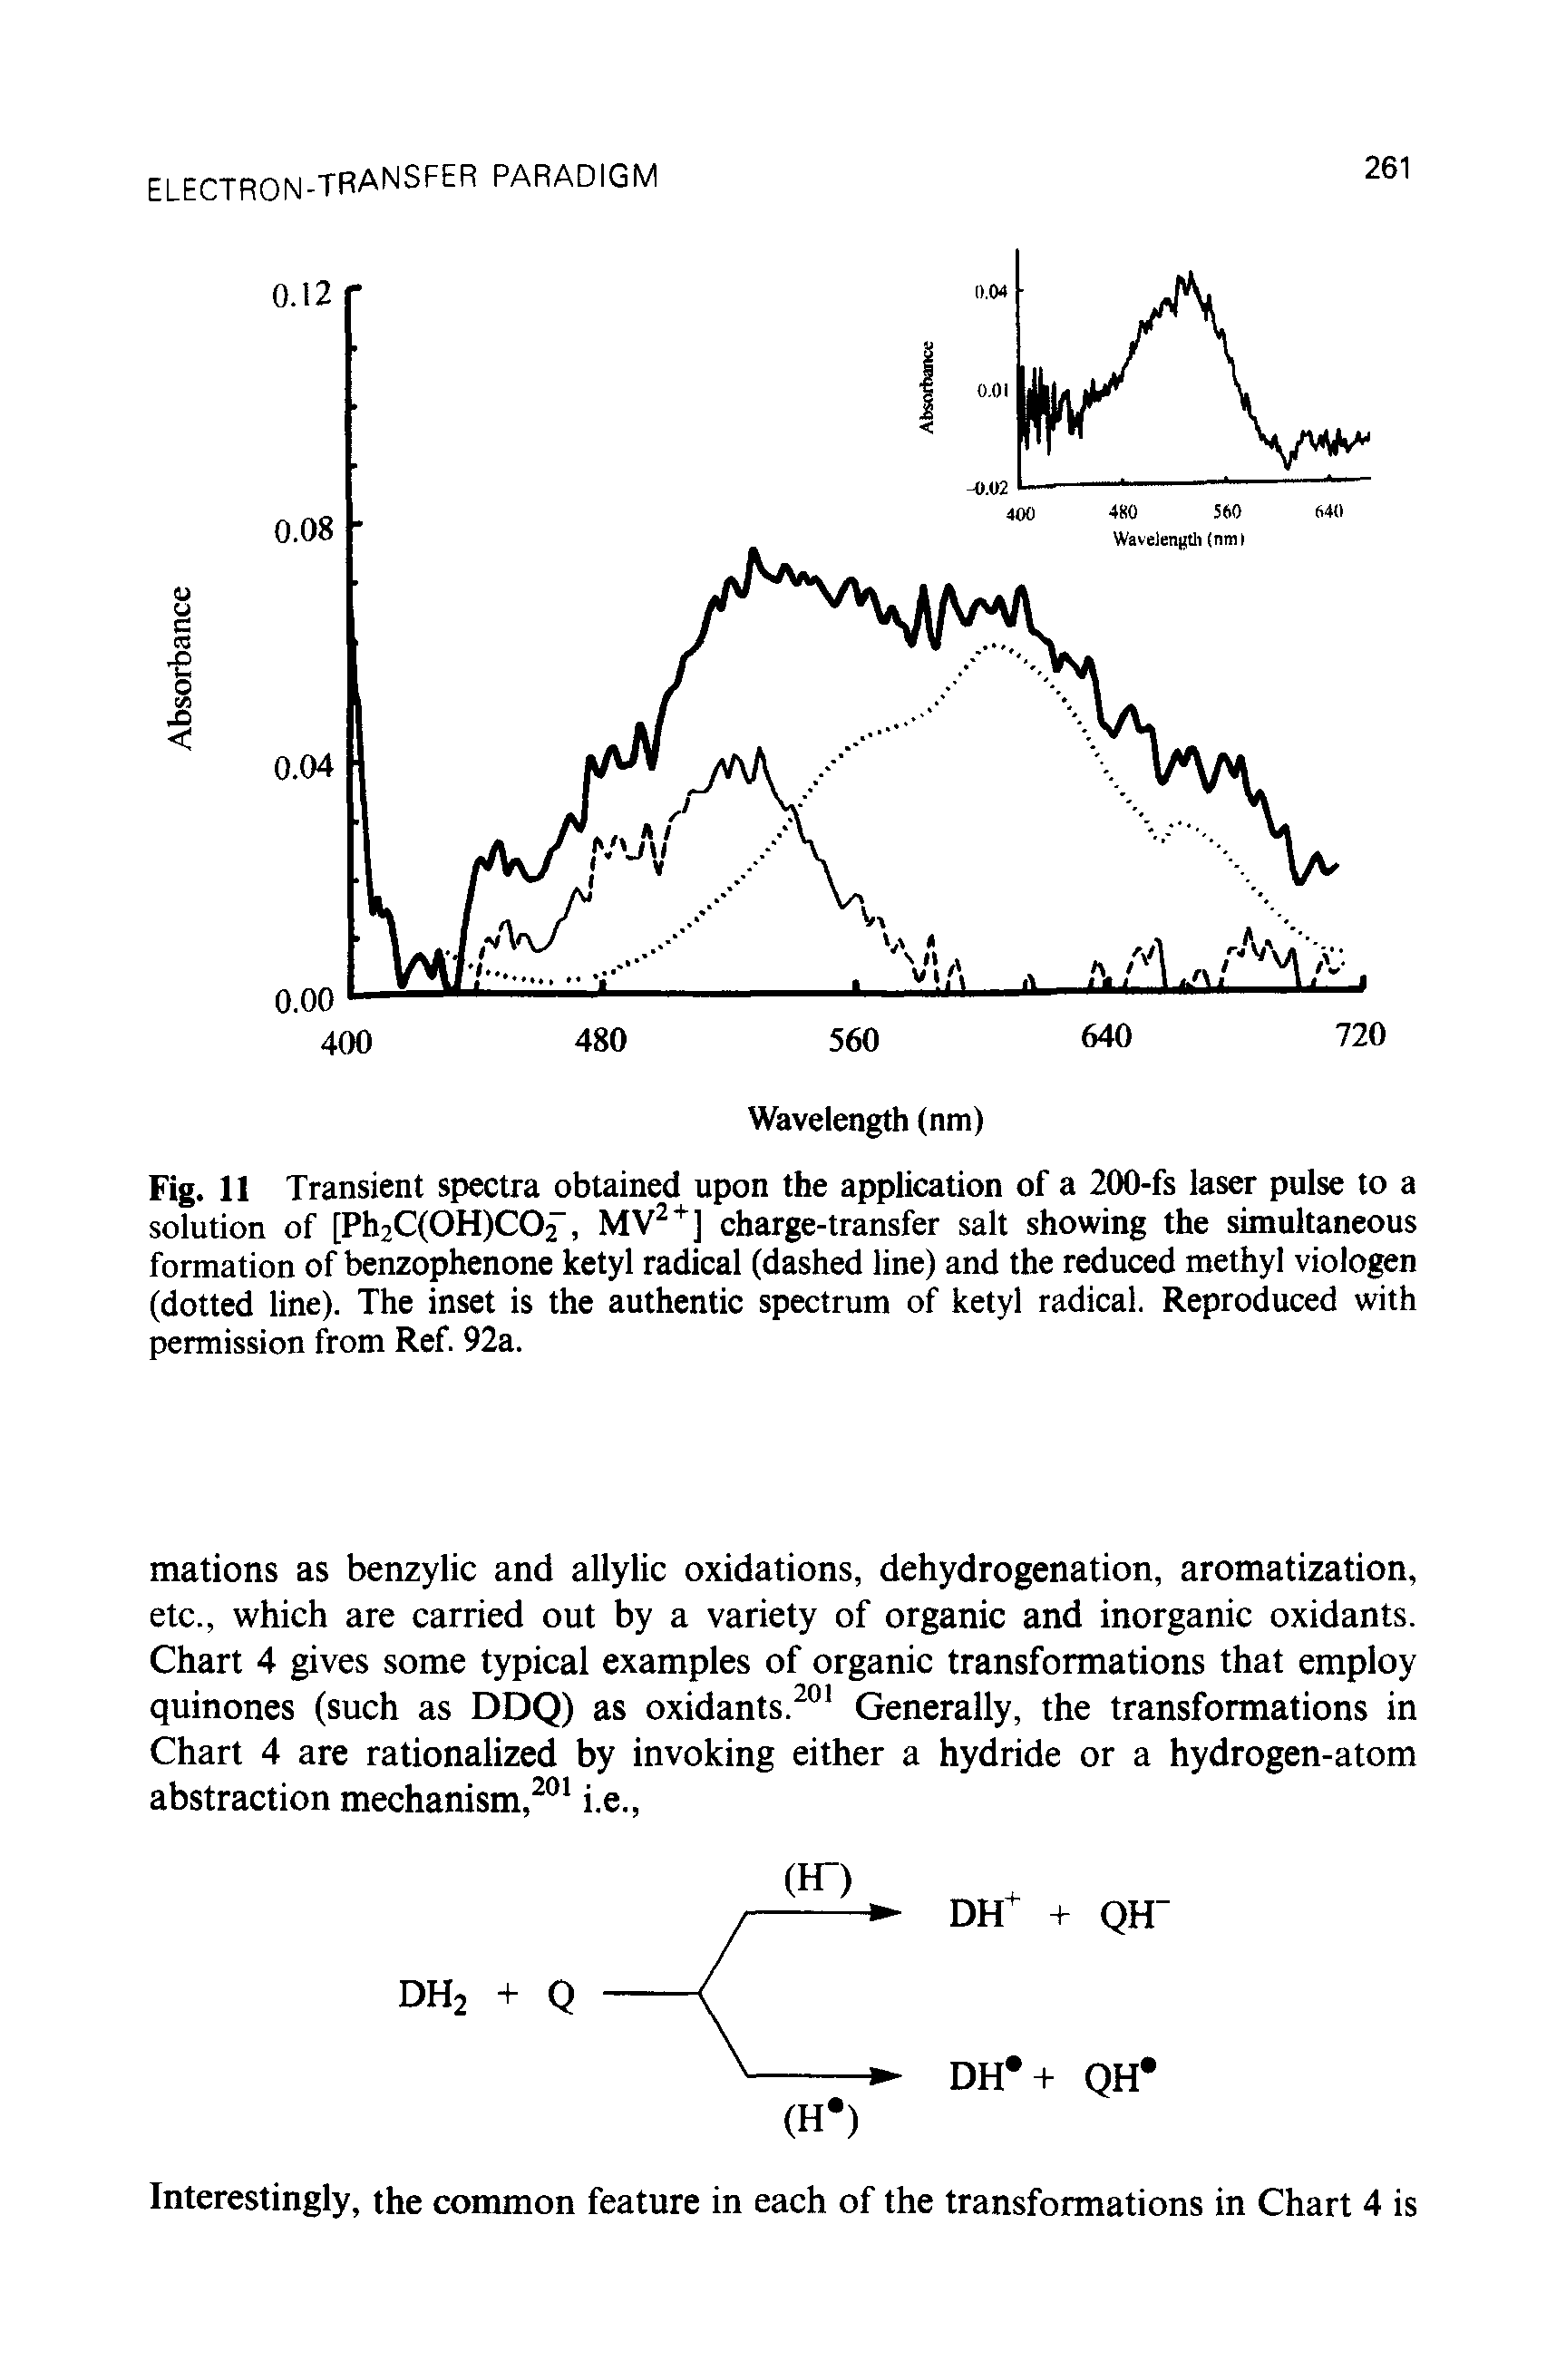 Fig. 11 Transient spectra obtained upon the application of a 200-fs laser pulse to a solution of [Ph2C(0H)C02, MV2+] charge-transfer salt showing the simultaneous formation of benzophenone ketyl radical (dashed line) and the reduced methyl viologen (dotted line). The inset is the authentic spectrum of ketyl radical. Reproduced with permission from Ref. 92a.